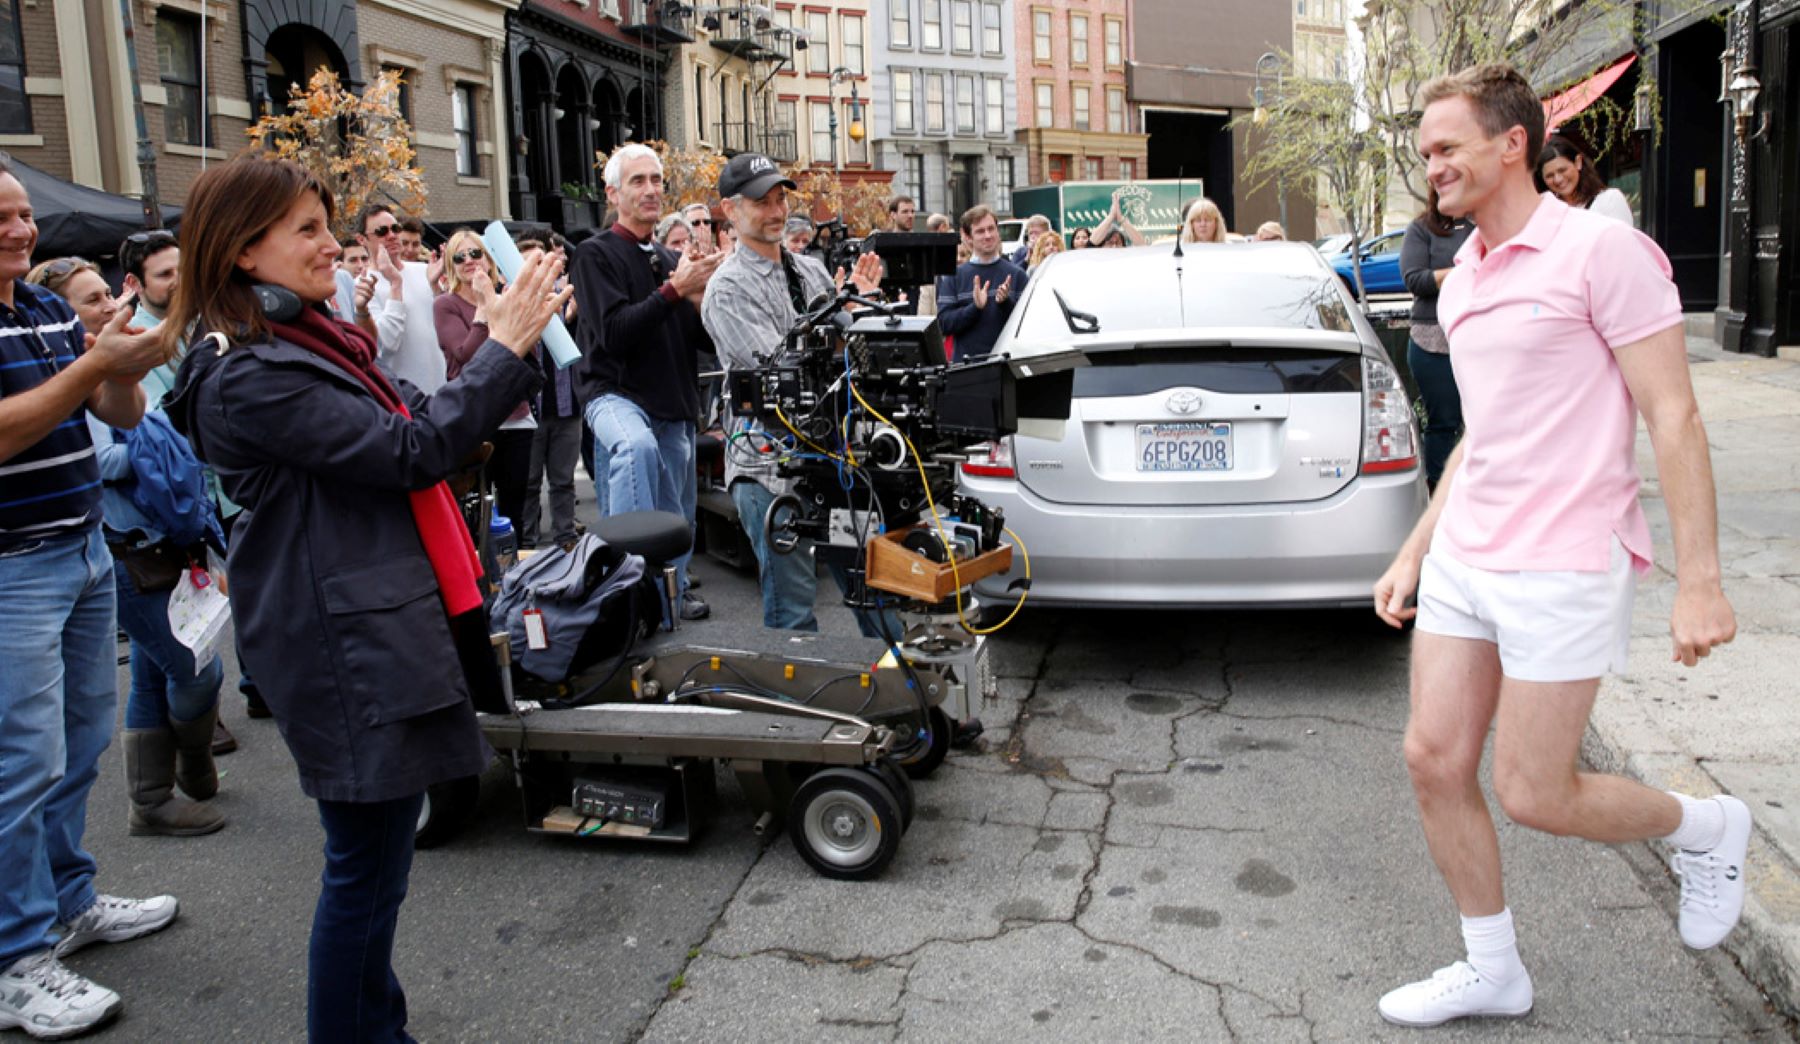 Neil Patrick Harris filming the finale of 'How I Met Your Mother' for CBS in Los Angeles, California